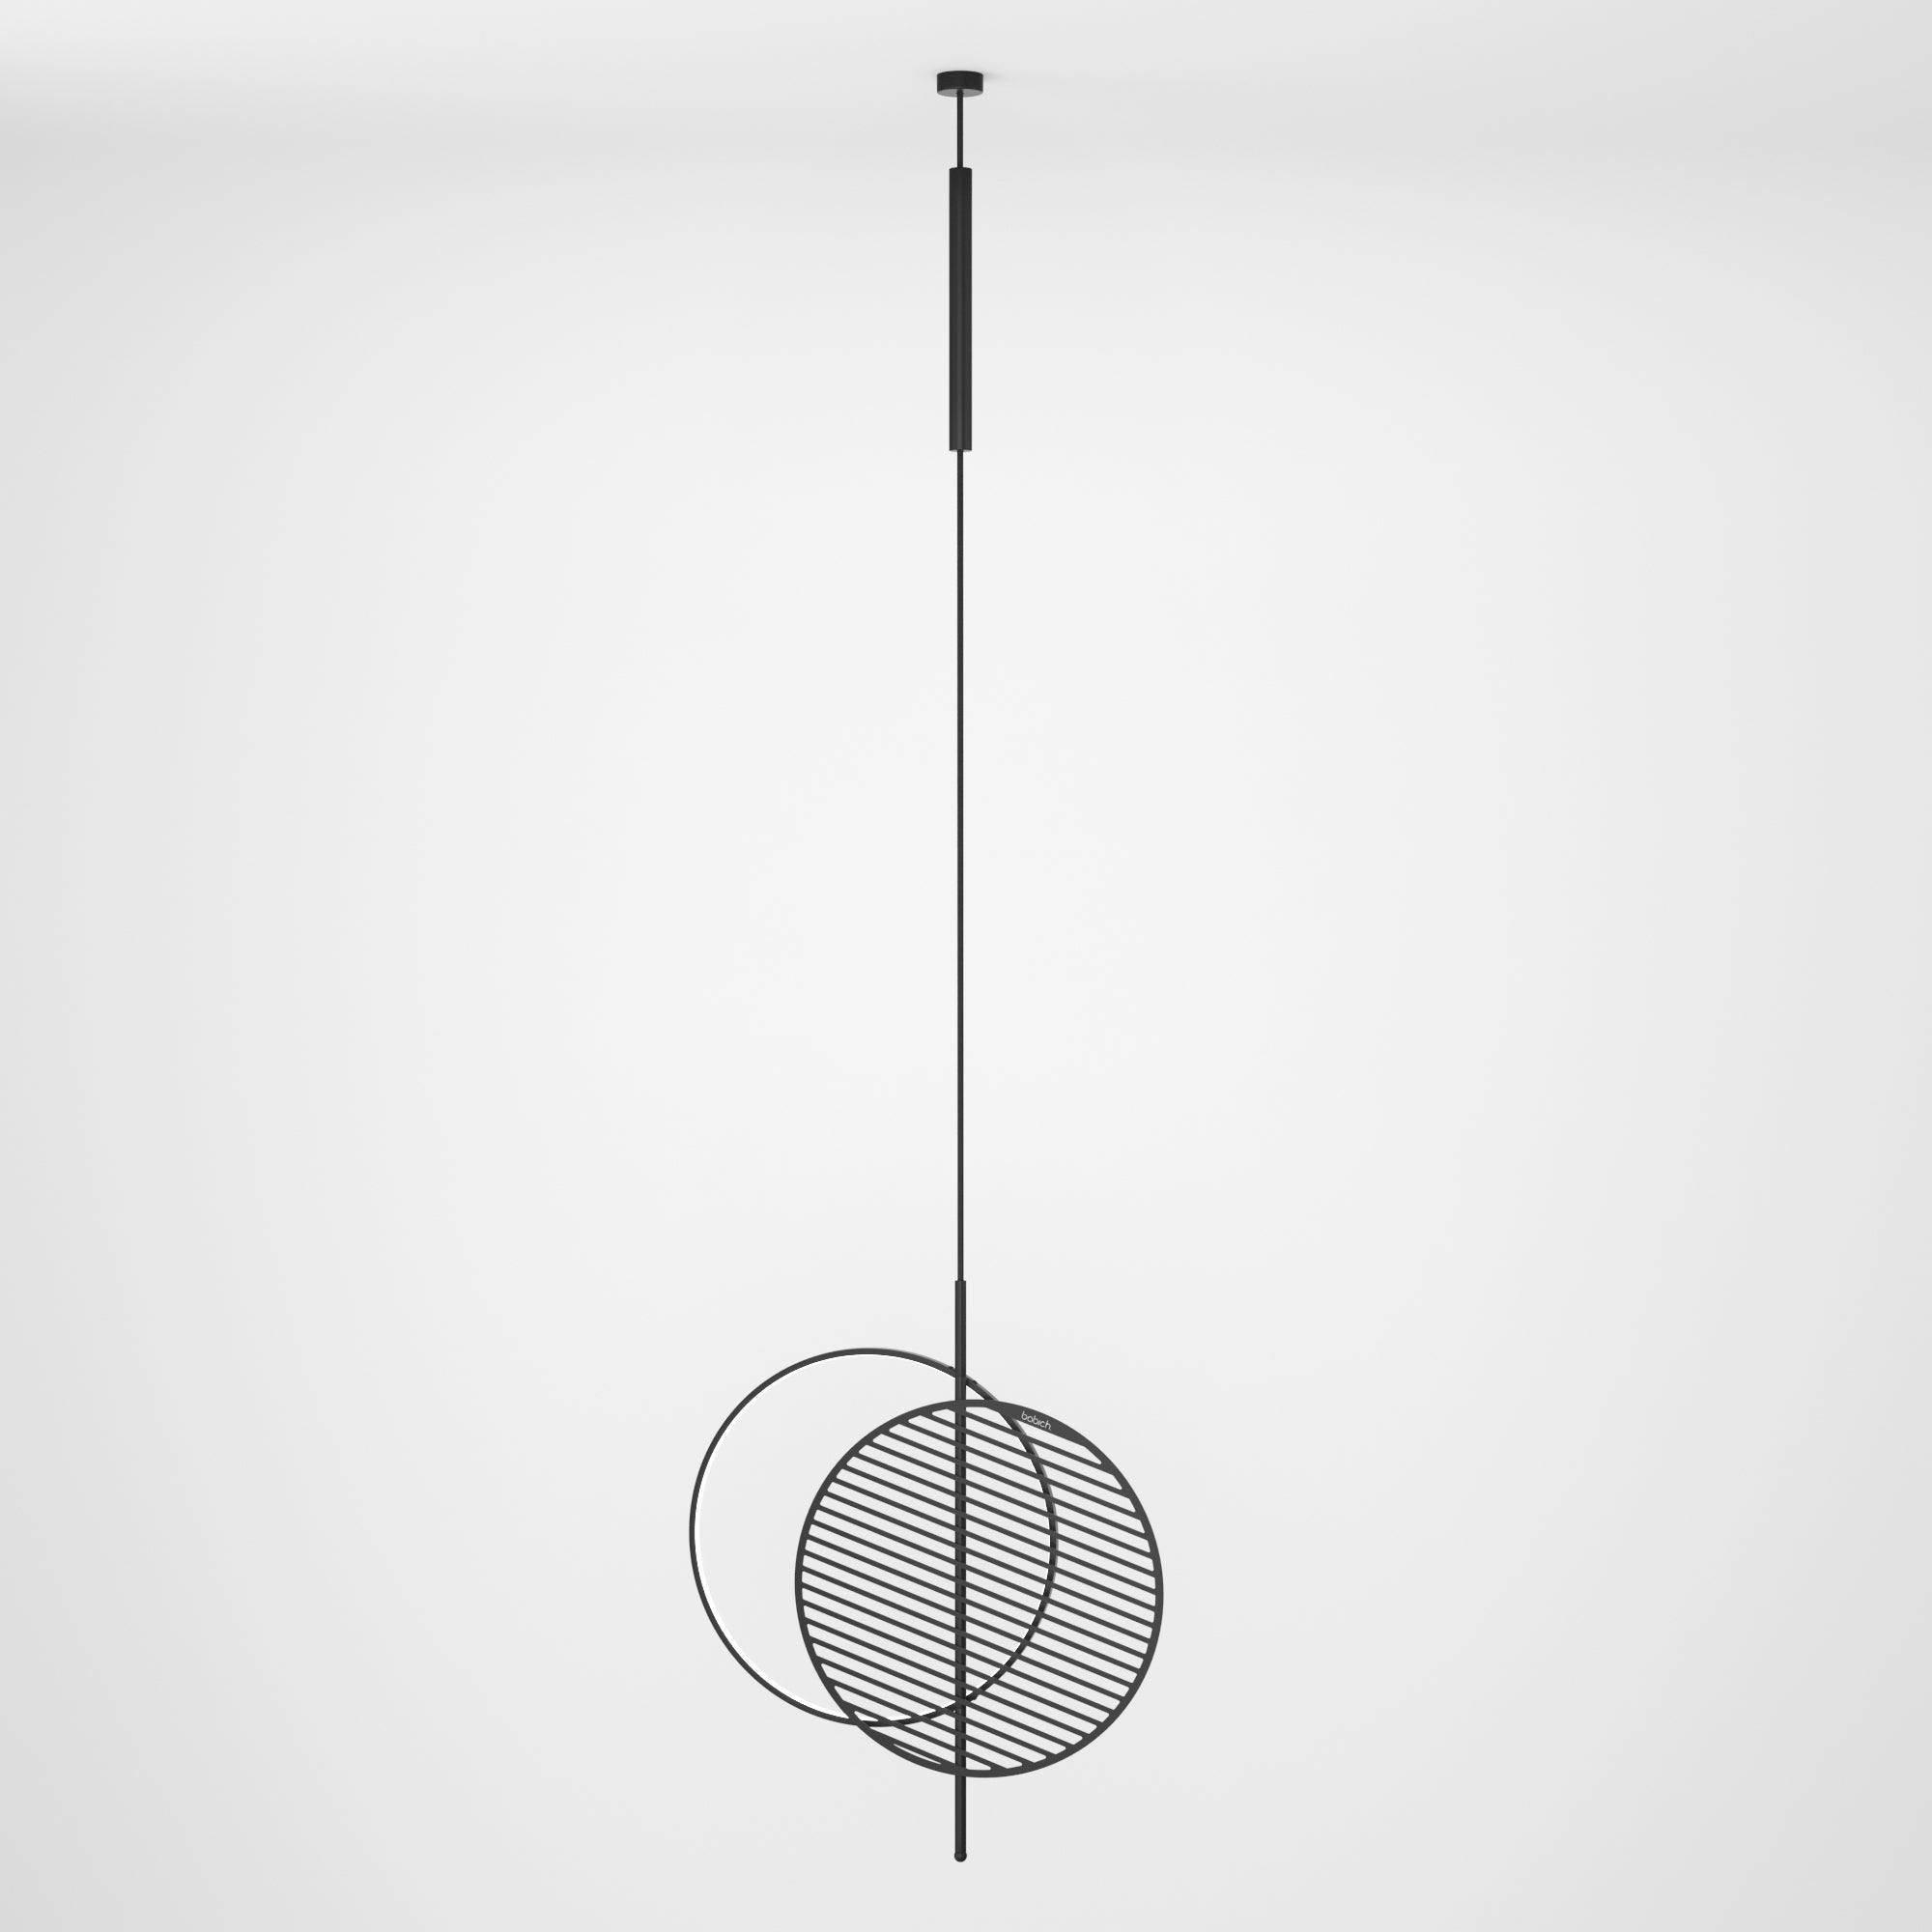 Mid lighting

Product name: Mid
Category: Lighting
Type: Ceiling light
Material: Steel rods, steel, textile cable
Overall dimensions: H: 620 mm / W: 500 mm
Light source: LED stripe, 2340 Lum, driver included, temperature 3000K or 4000K,